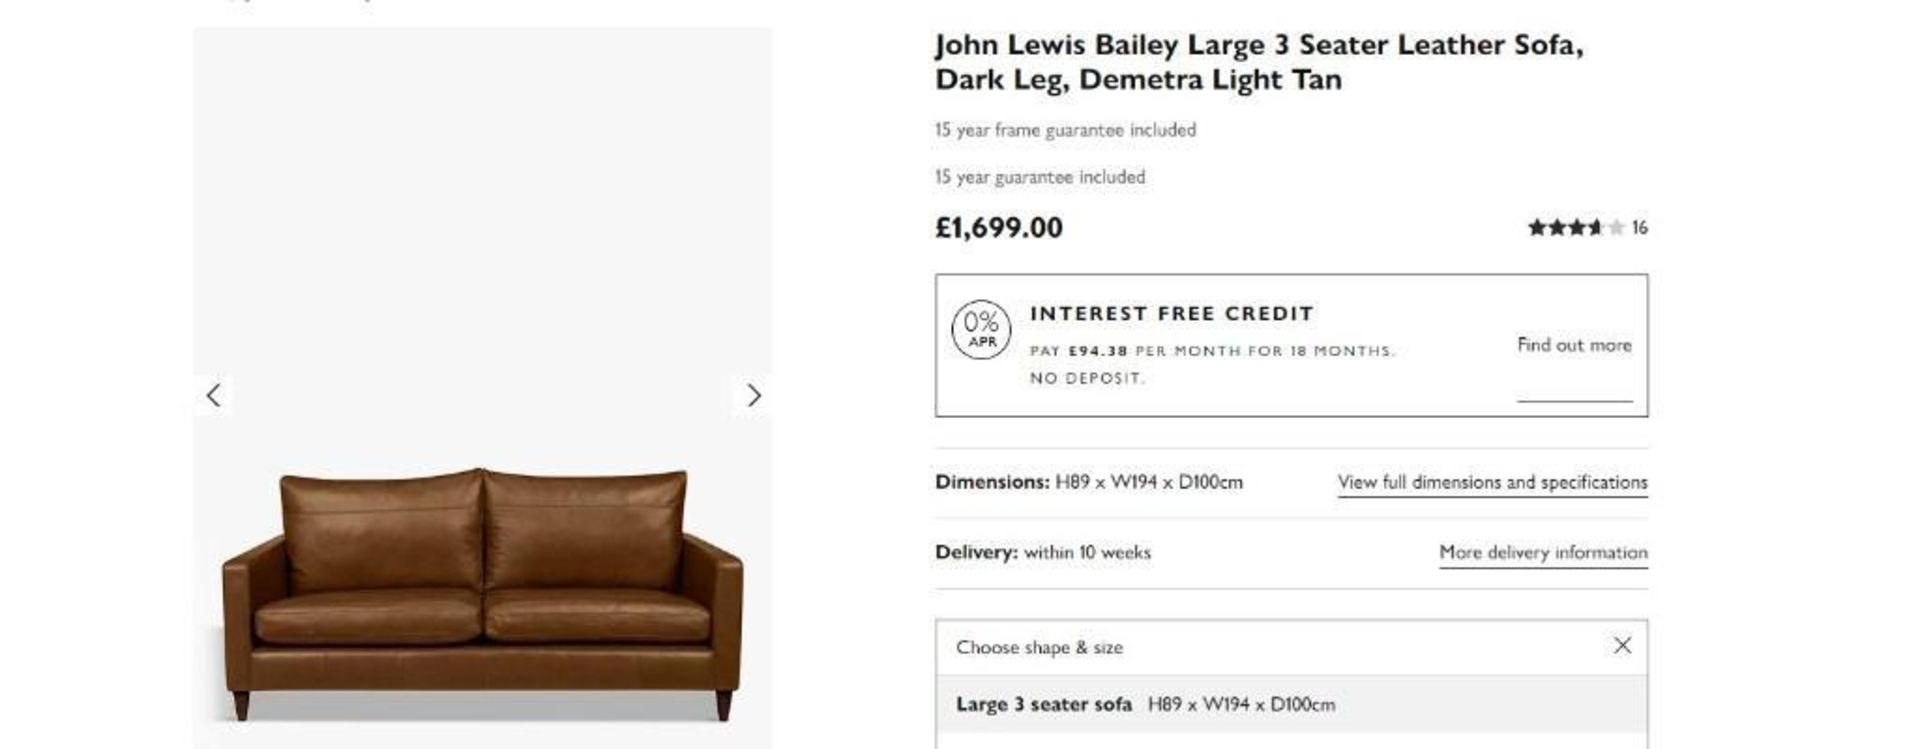 BRAND NEW John Lewis Bailey full leather 3 + 1 + 1 sofa in Tan. RRP: £4,298 - Image 5 of 10